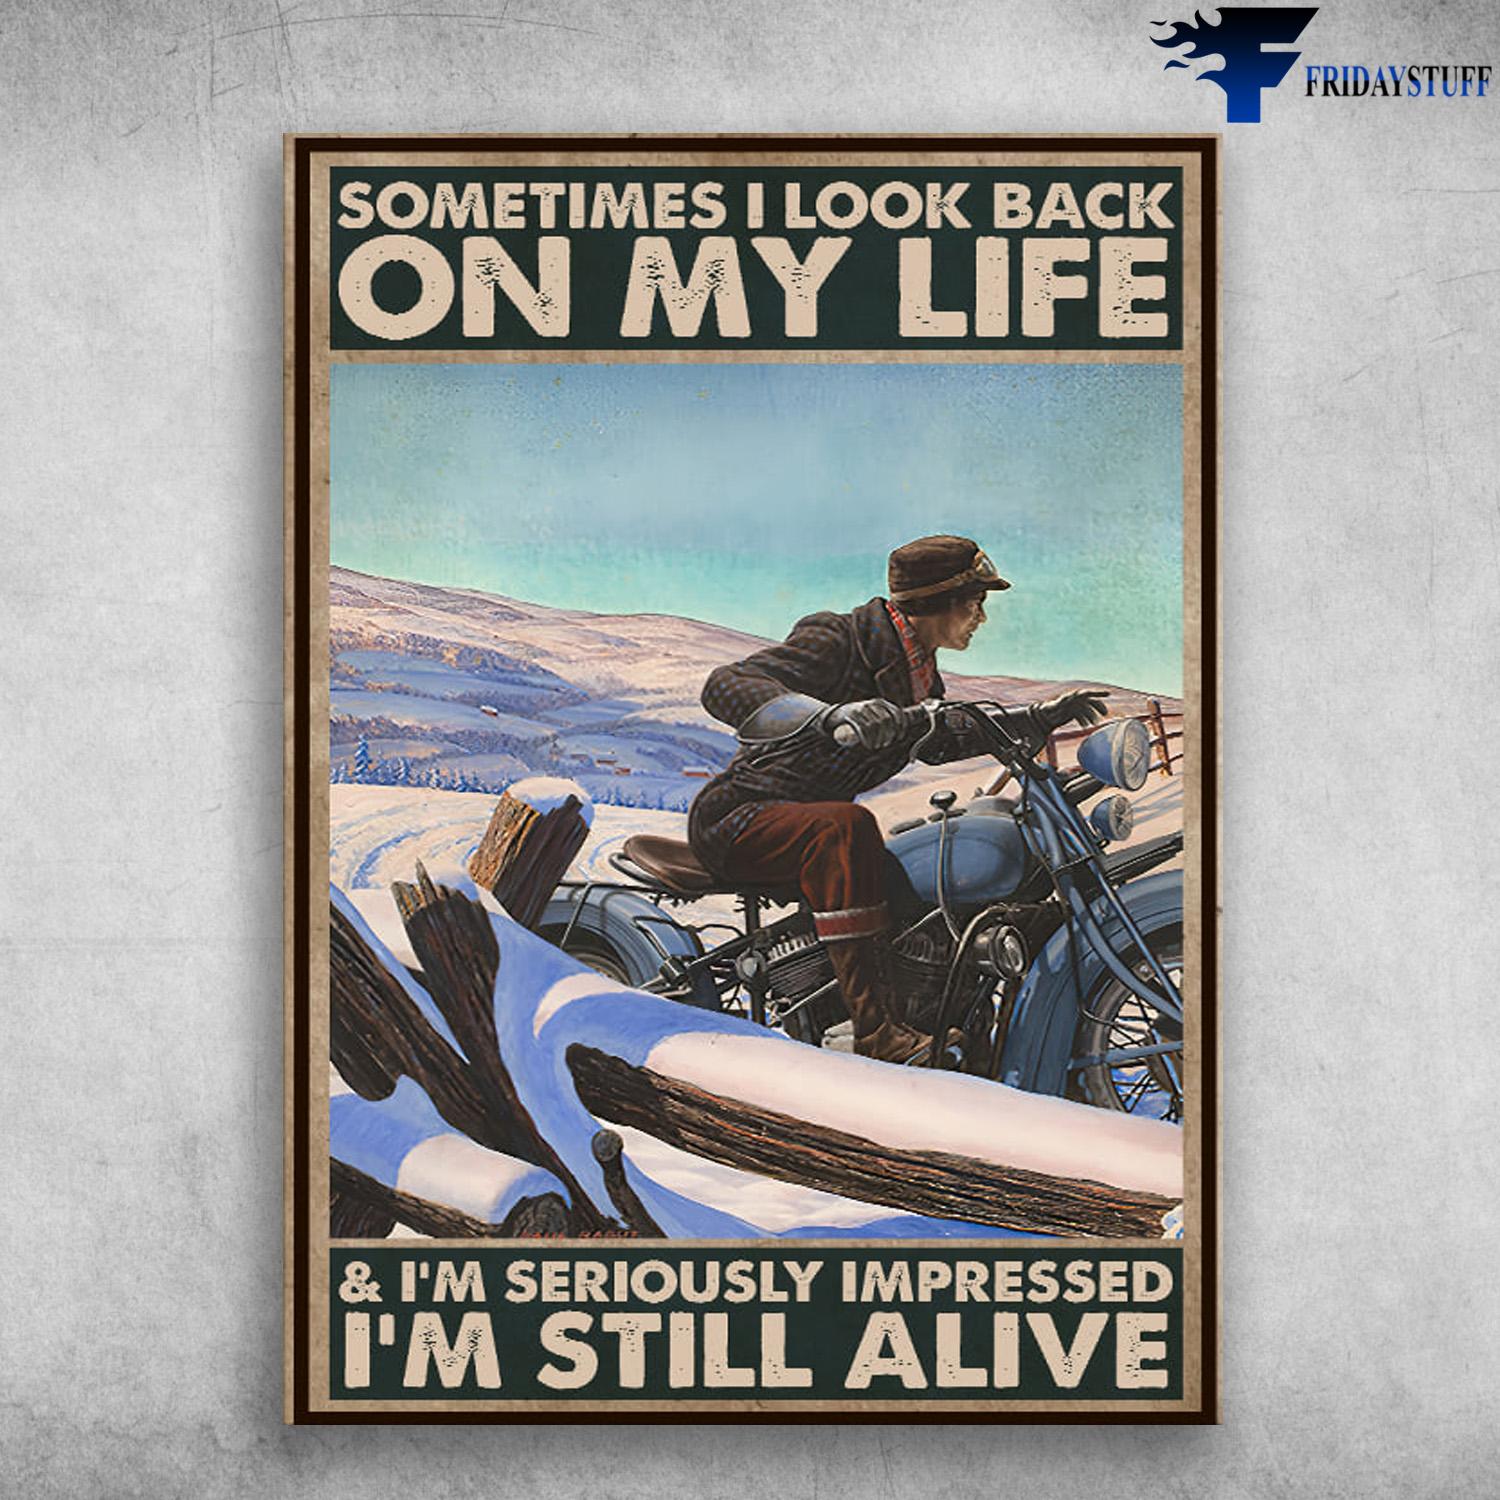 Motorcycle Lover, Winter Poster, Sometimes I Look Back On My Life, And I'm Seriously Inpressed, I'm Still Alive